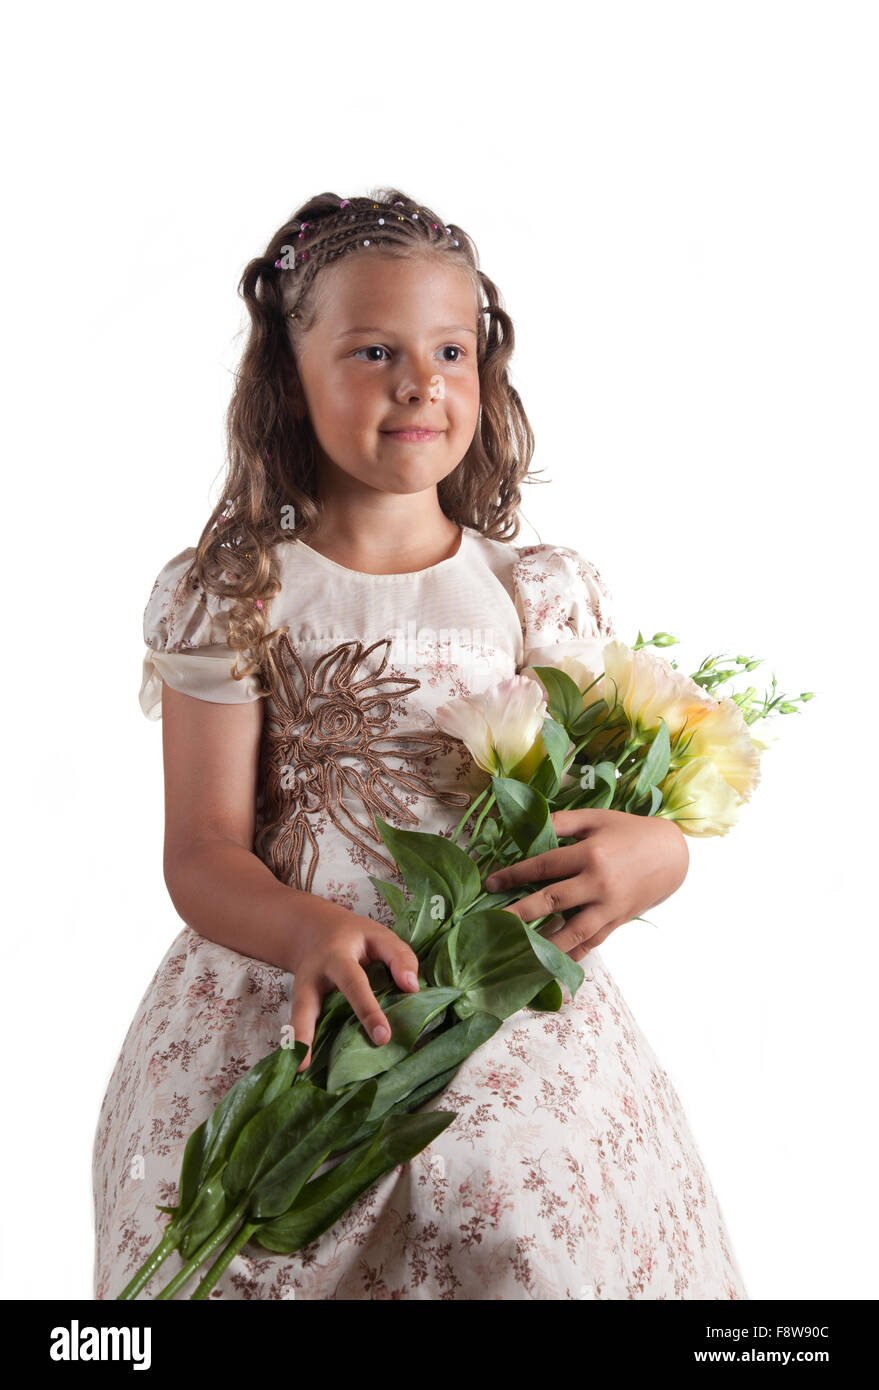 Cute little girl with pigtail hairstyle holding flowers Stock Photo